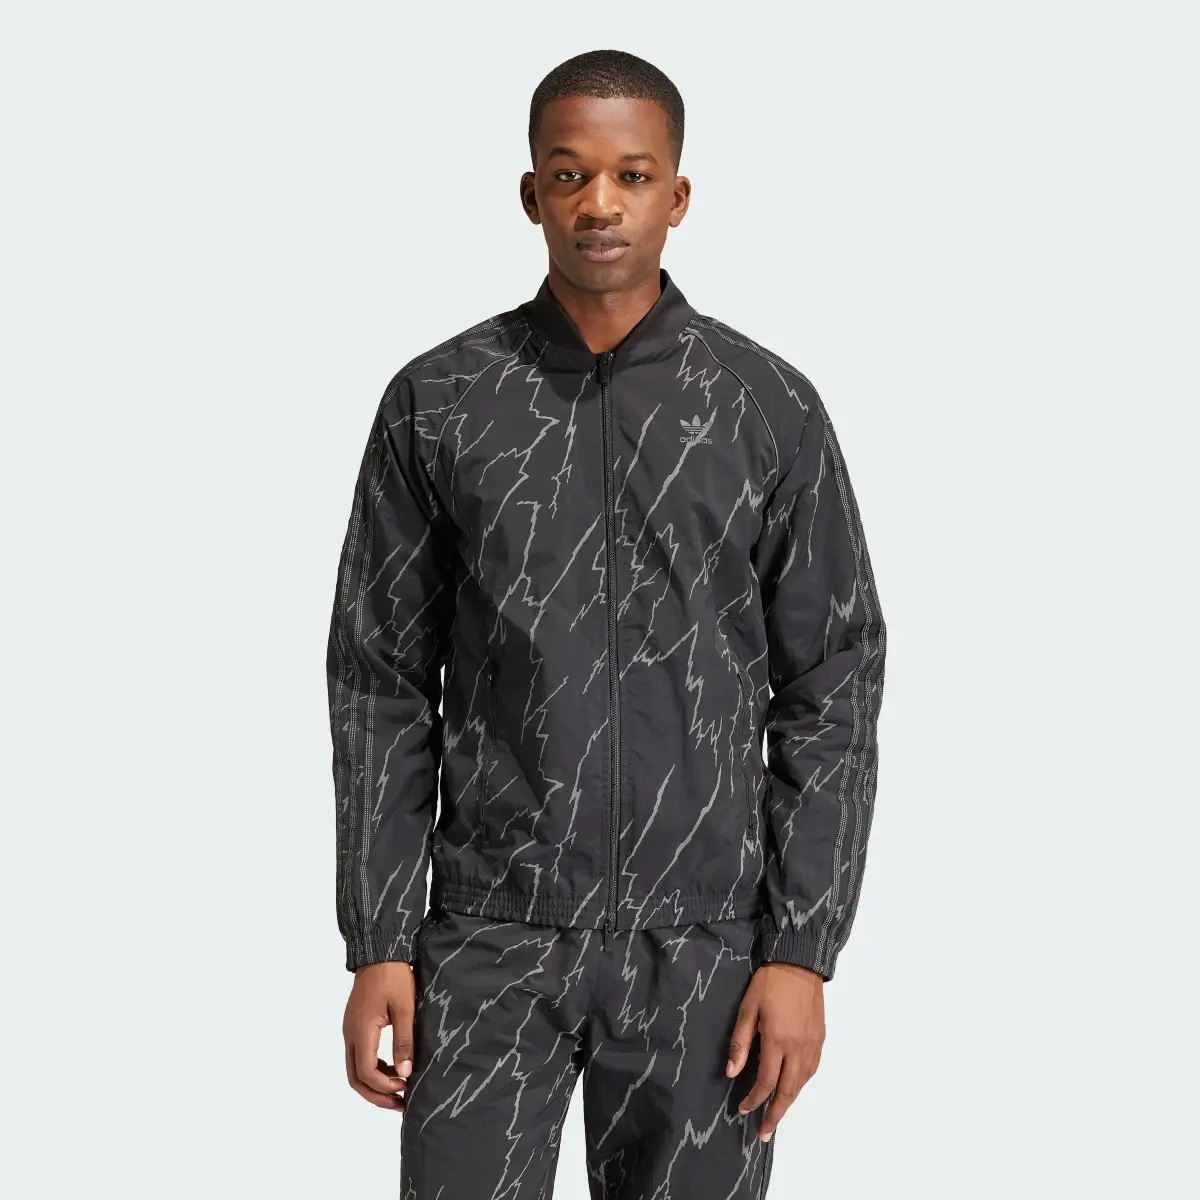 Adidas Allover Print SST Track Top. 2